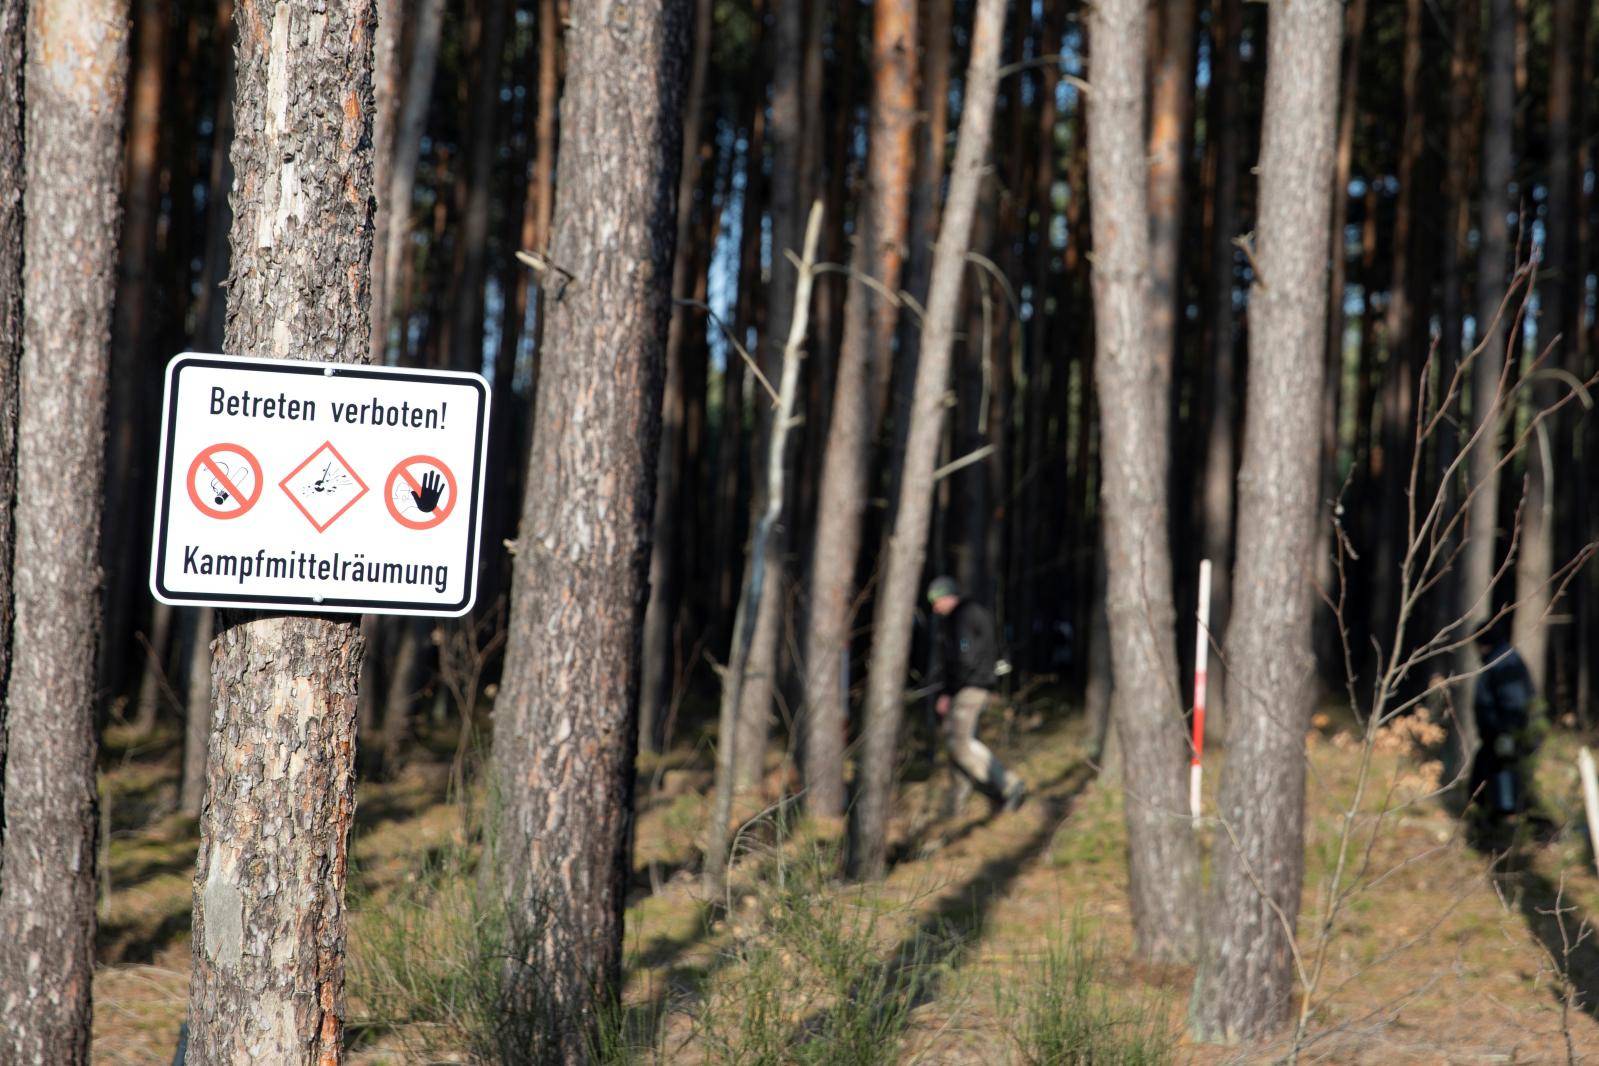 Unexploded ordnance warning signs are seen in the area where the U.S. electric vehicle pioneer Tesla will build its first European factory and design center in Gruenheide near Berlin